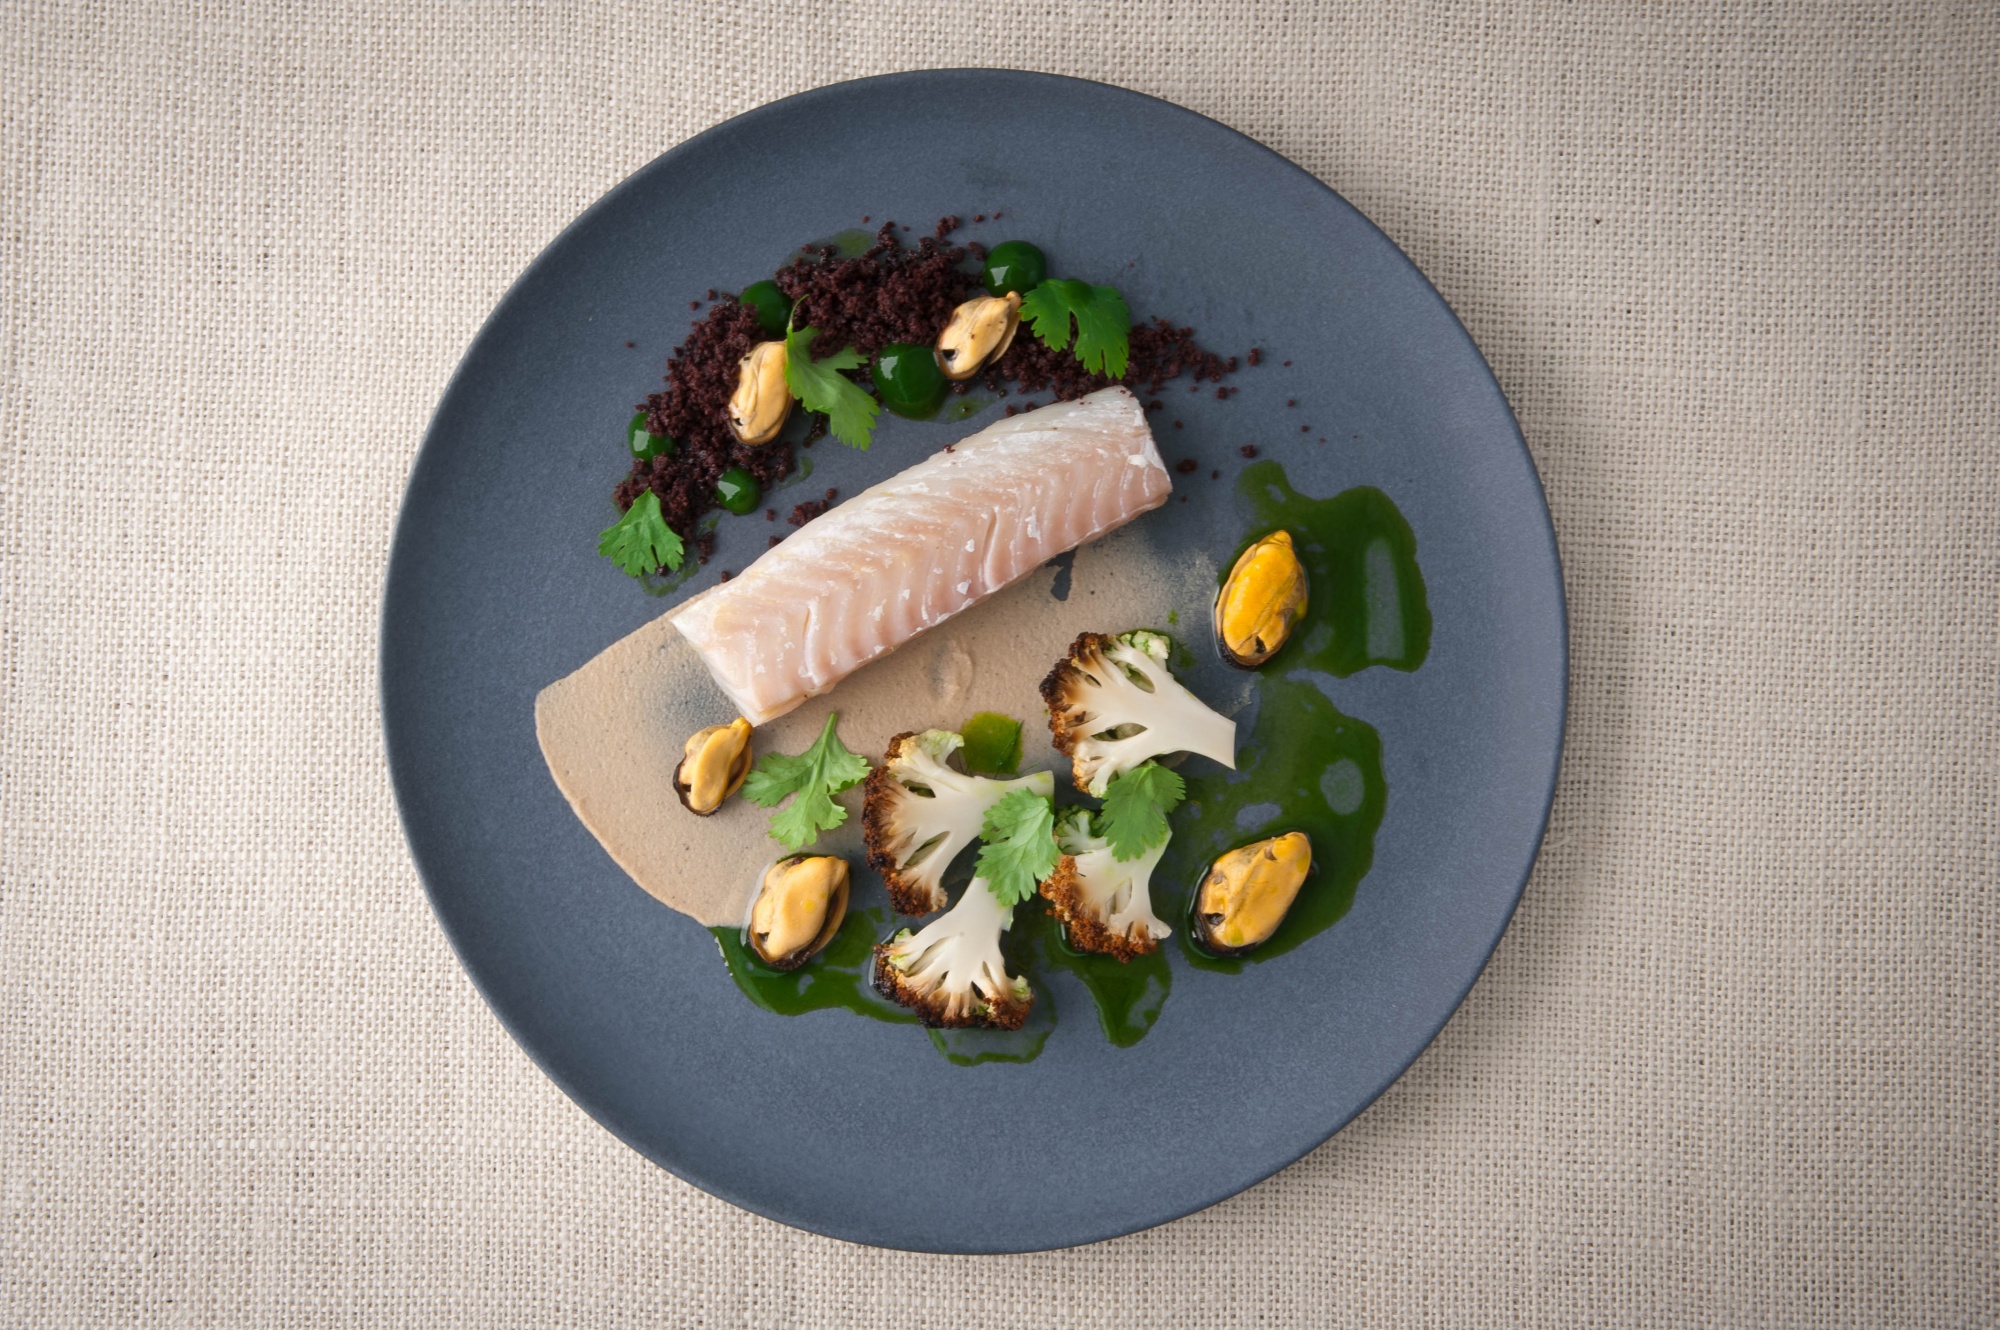 Cod, mussels and cauliflower